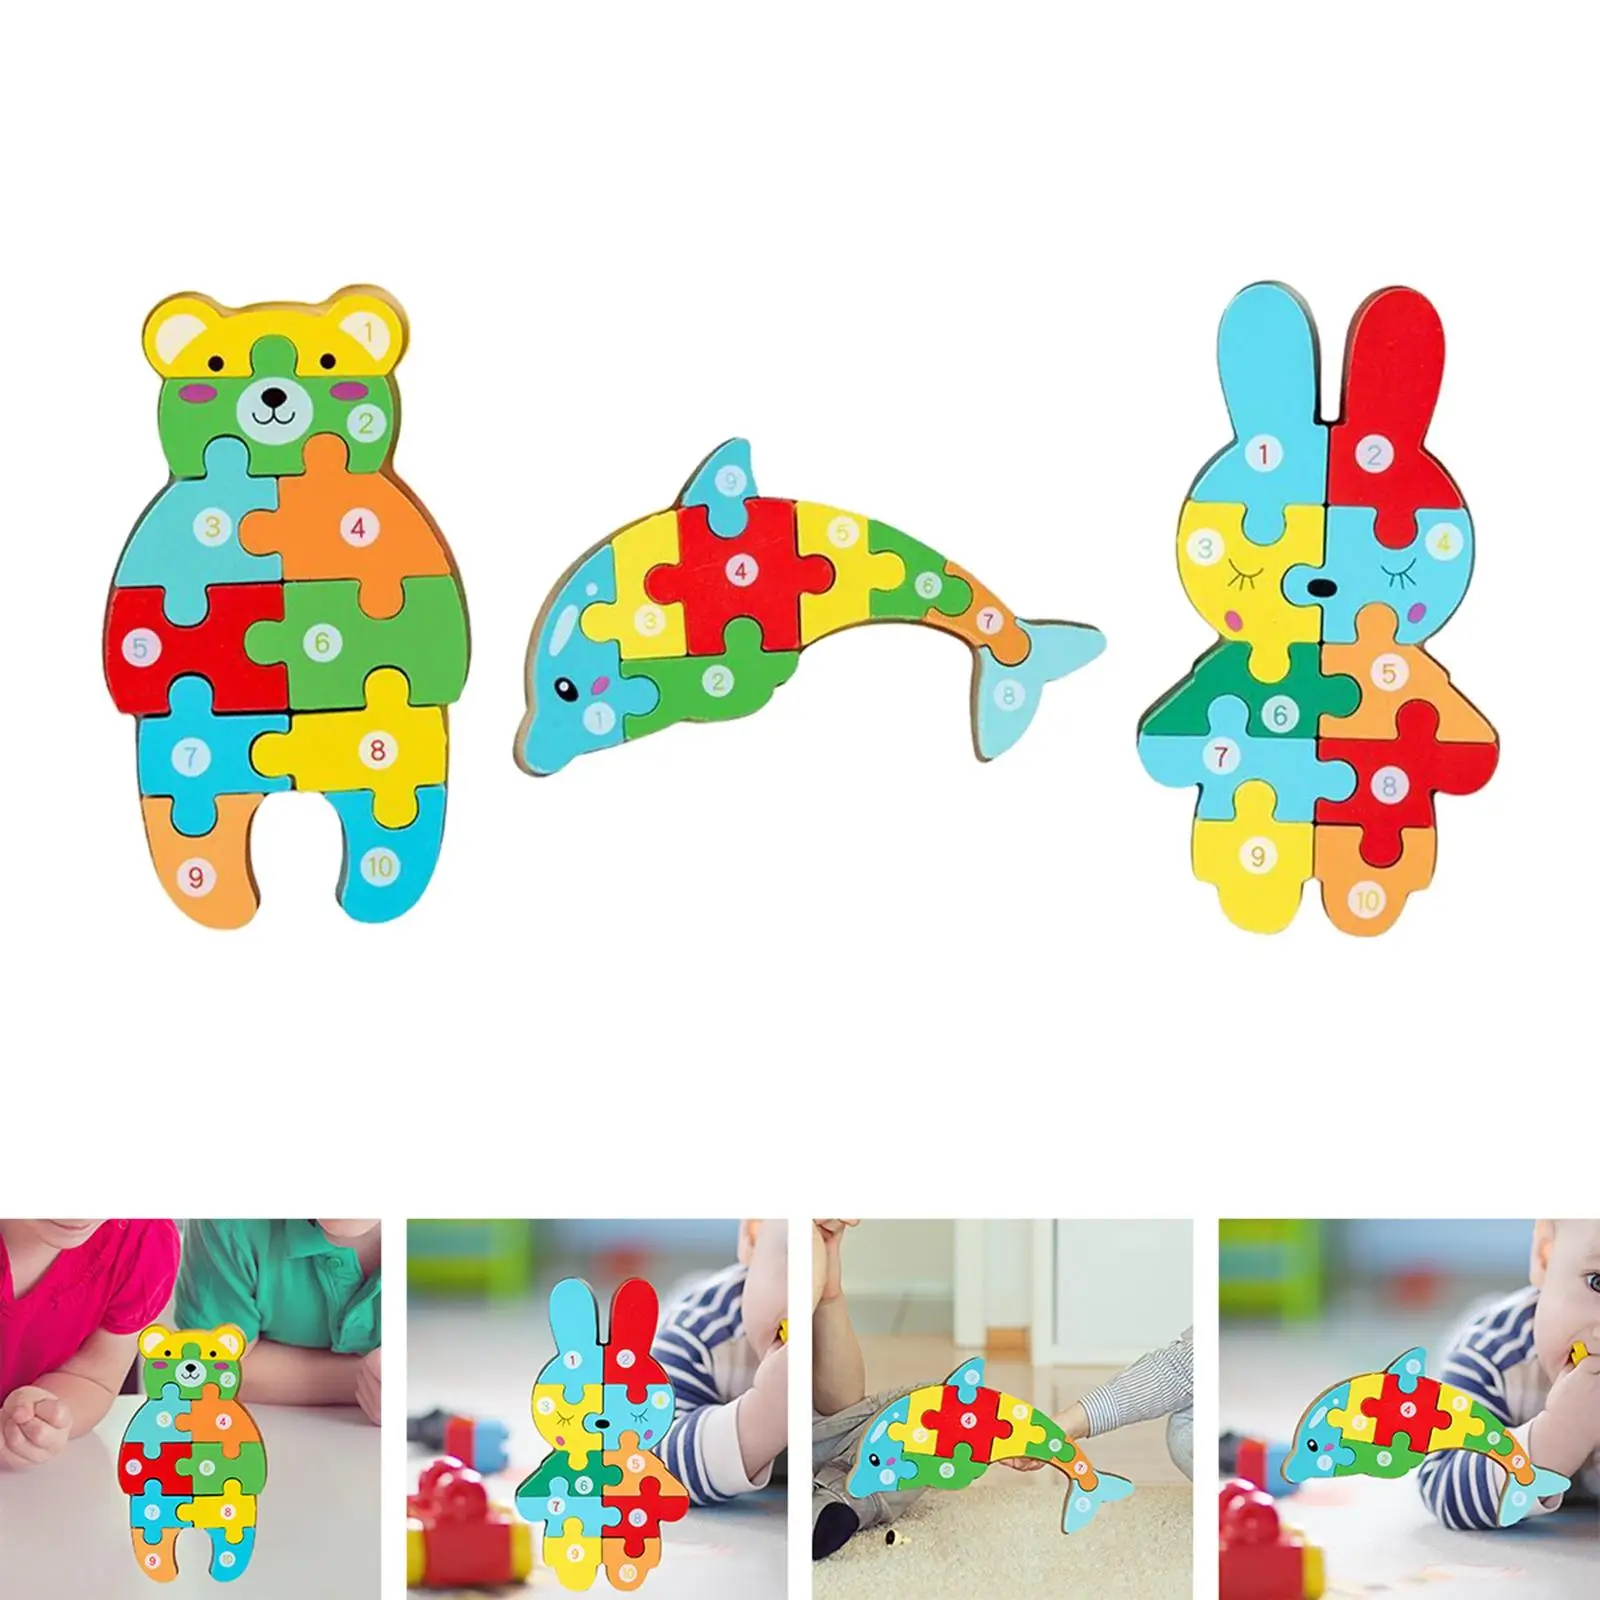 3D Animal Shapes Jigsaw Puzzles Kid Wooden Toy for Child Ages 2-6 Attractive+3D